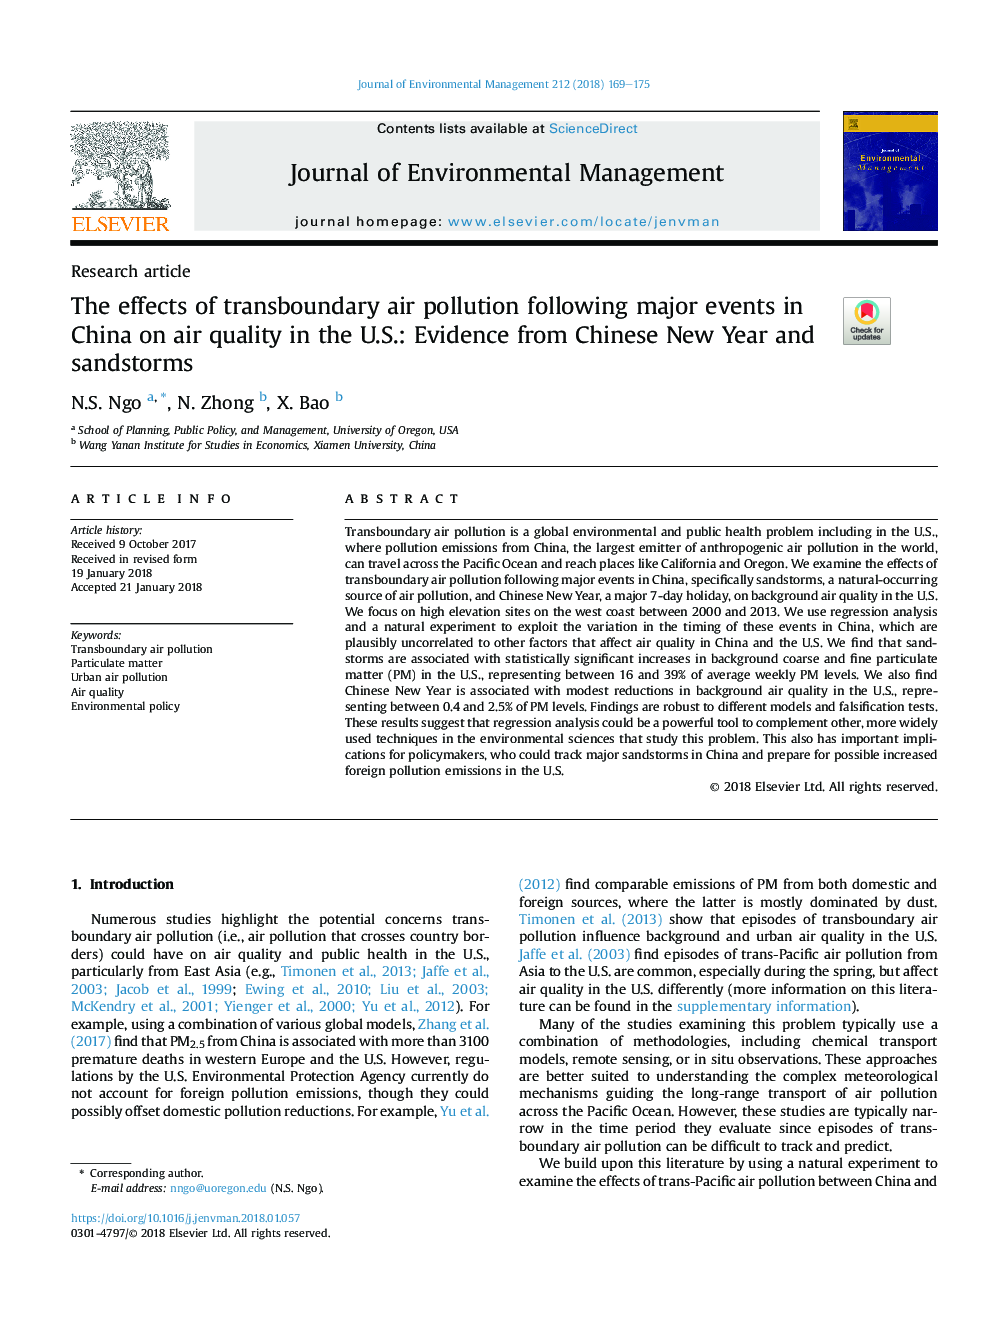 The effects of transboundary air pollution following major events in China on air quality in the U.S.: Evidence from Chinese New Year and sandstorms